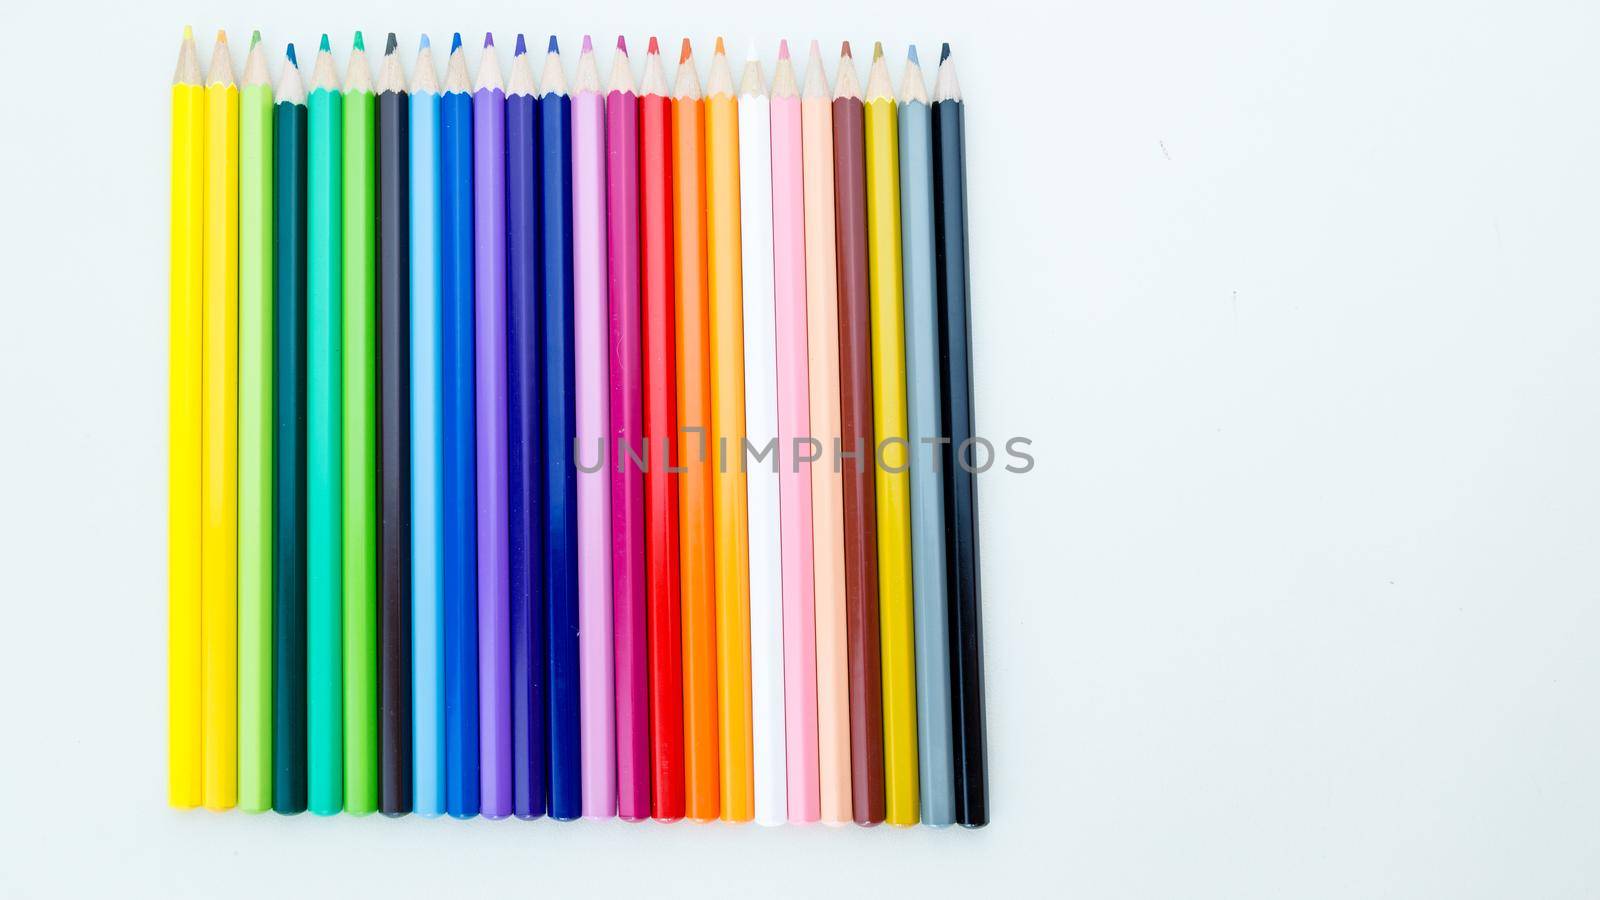 Colored pencil crayons in a row by imagesbykenny